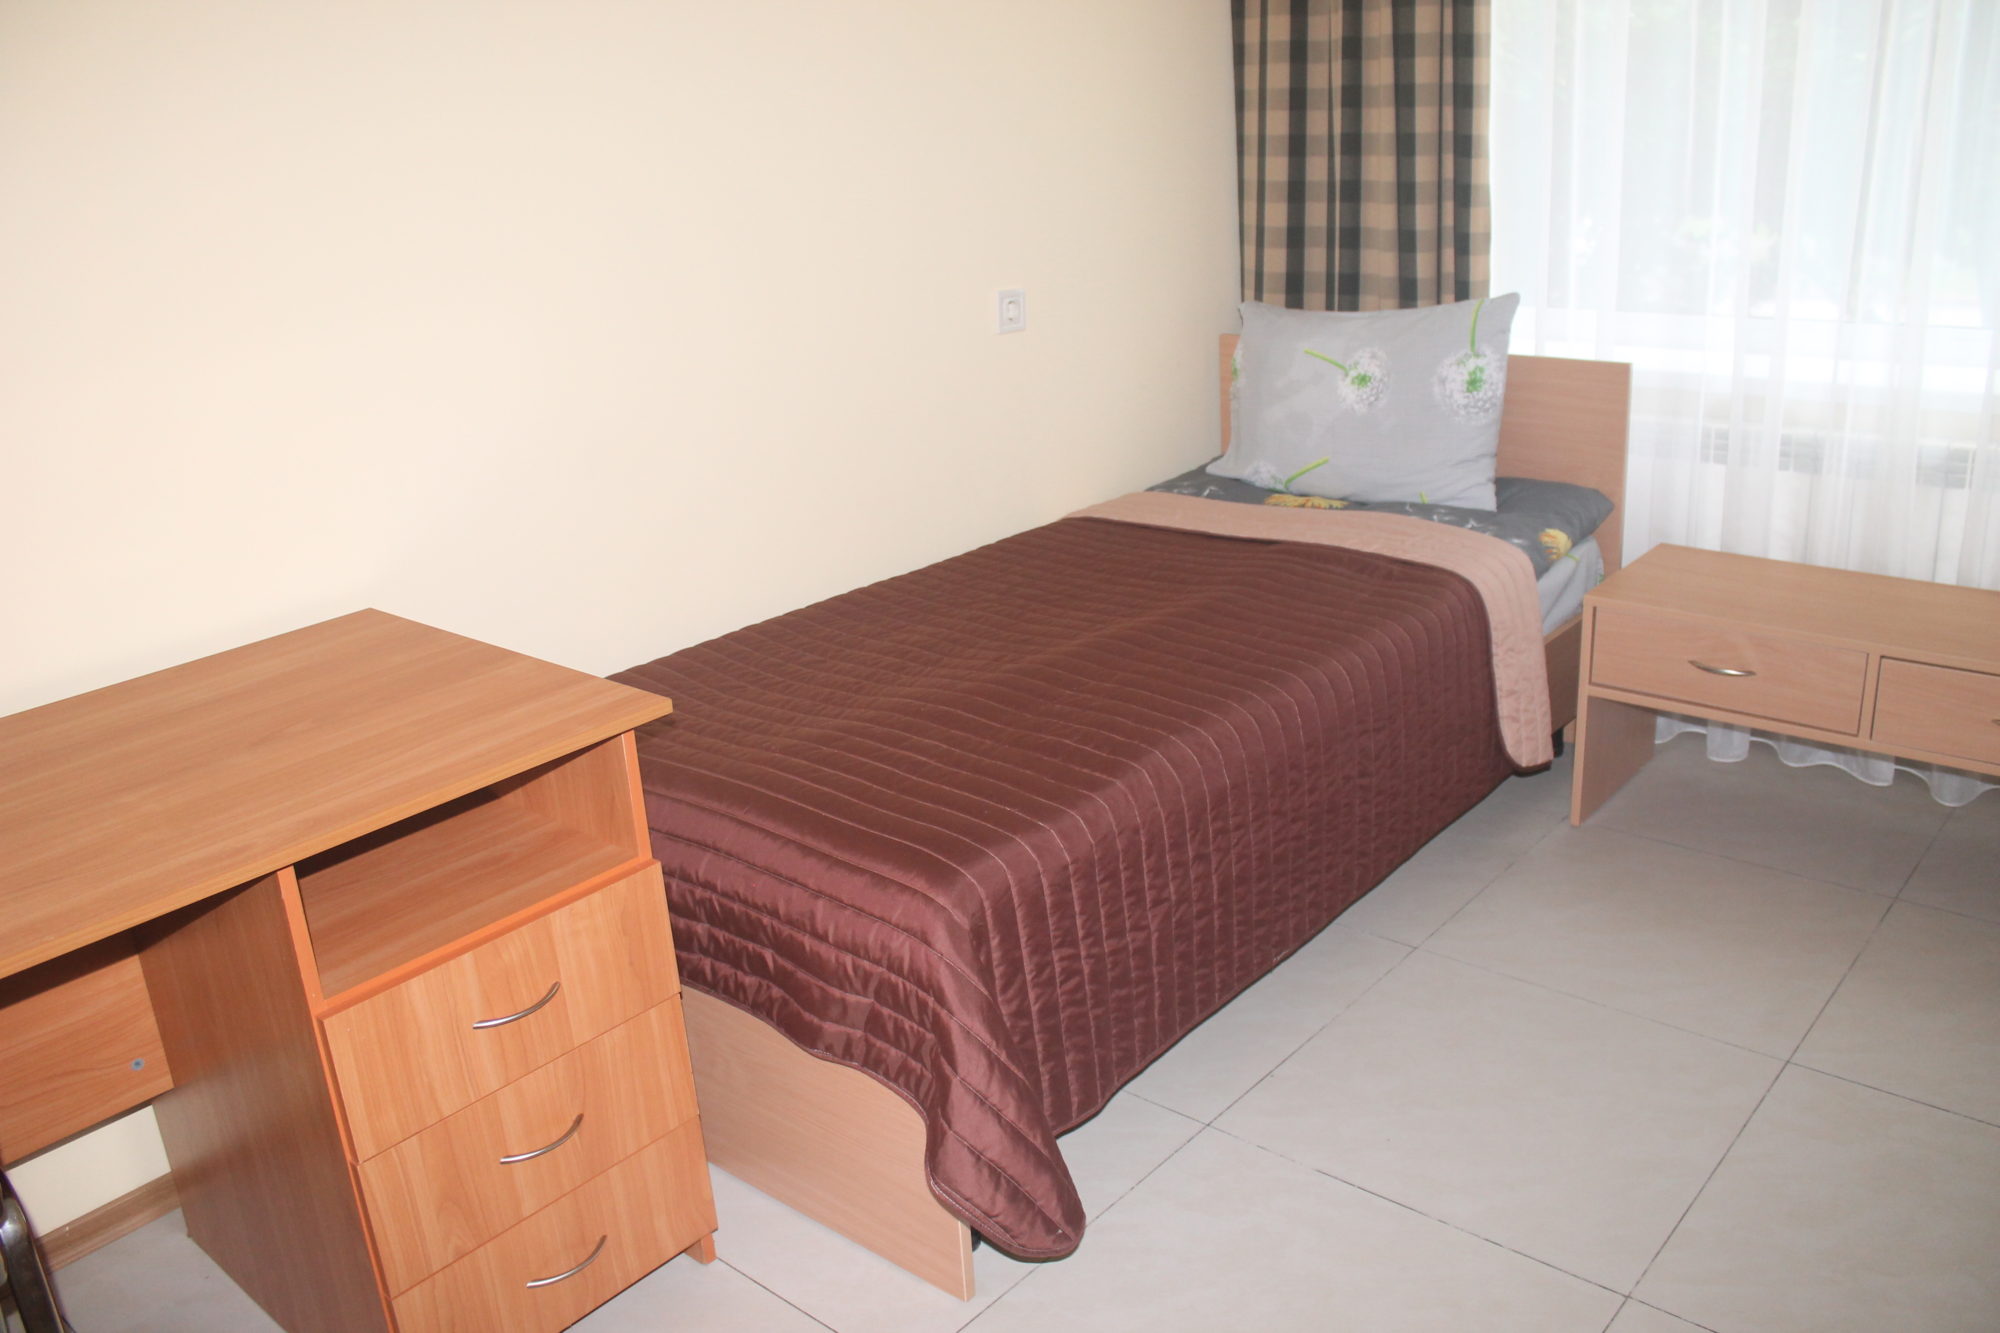 Double room (with shared bathroom and shower on the floor)